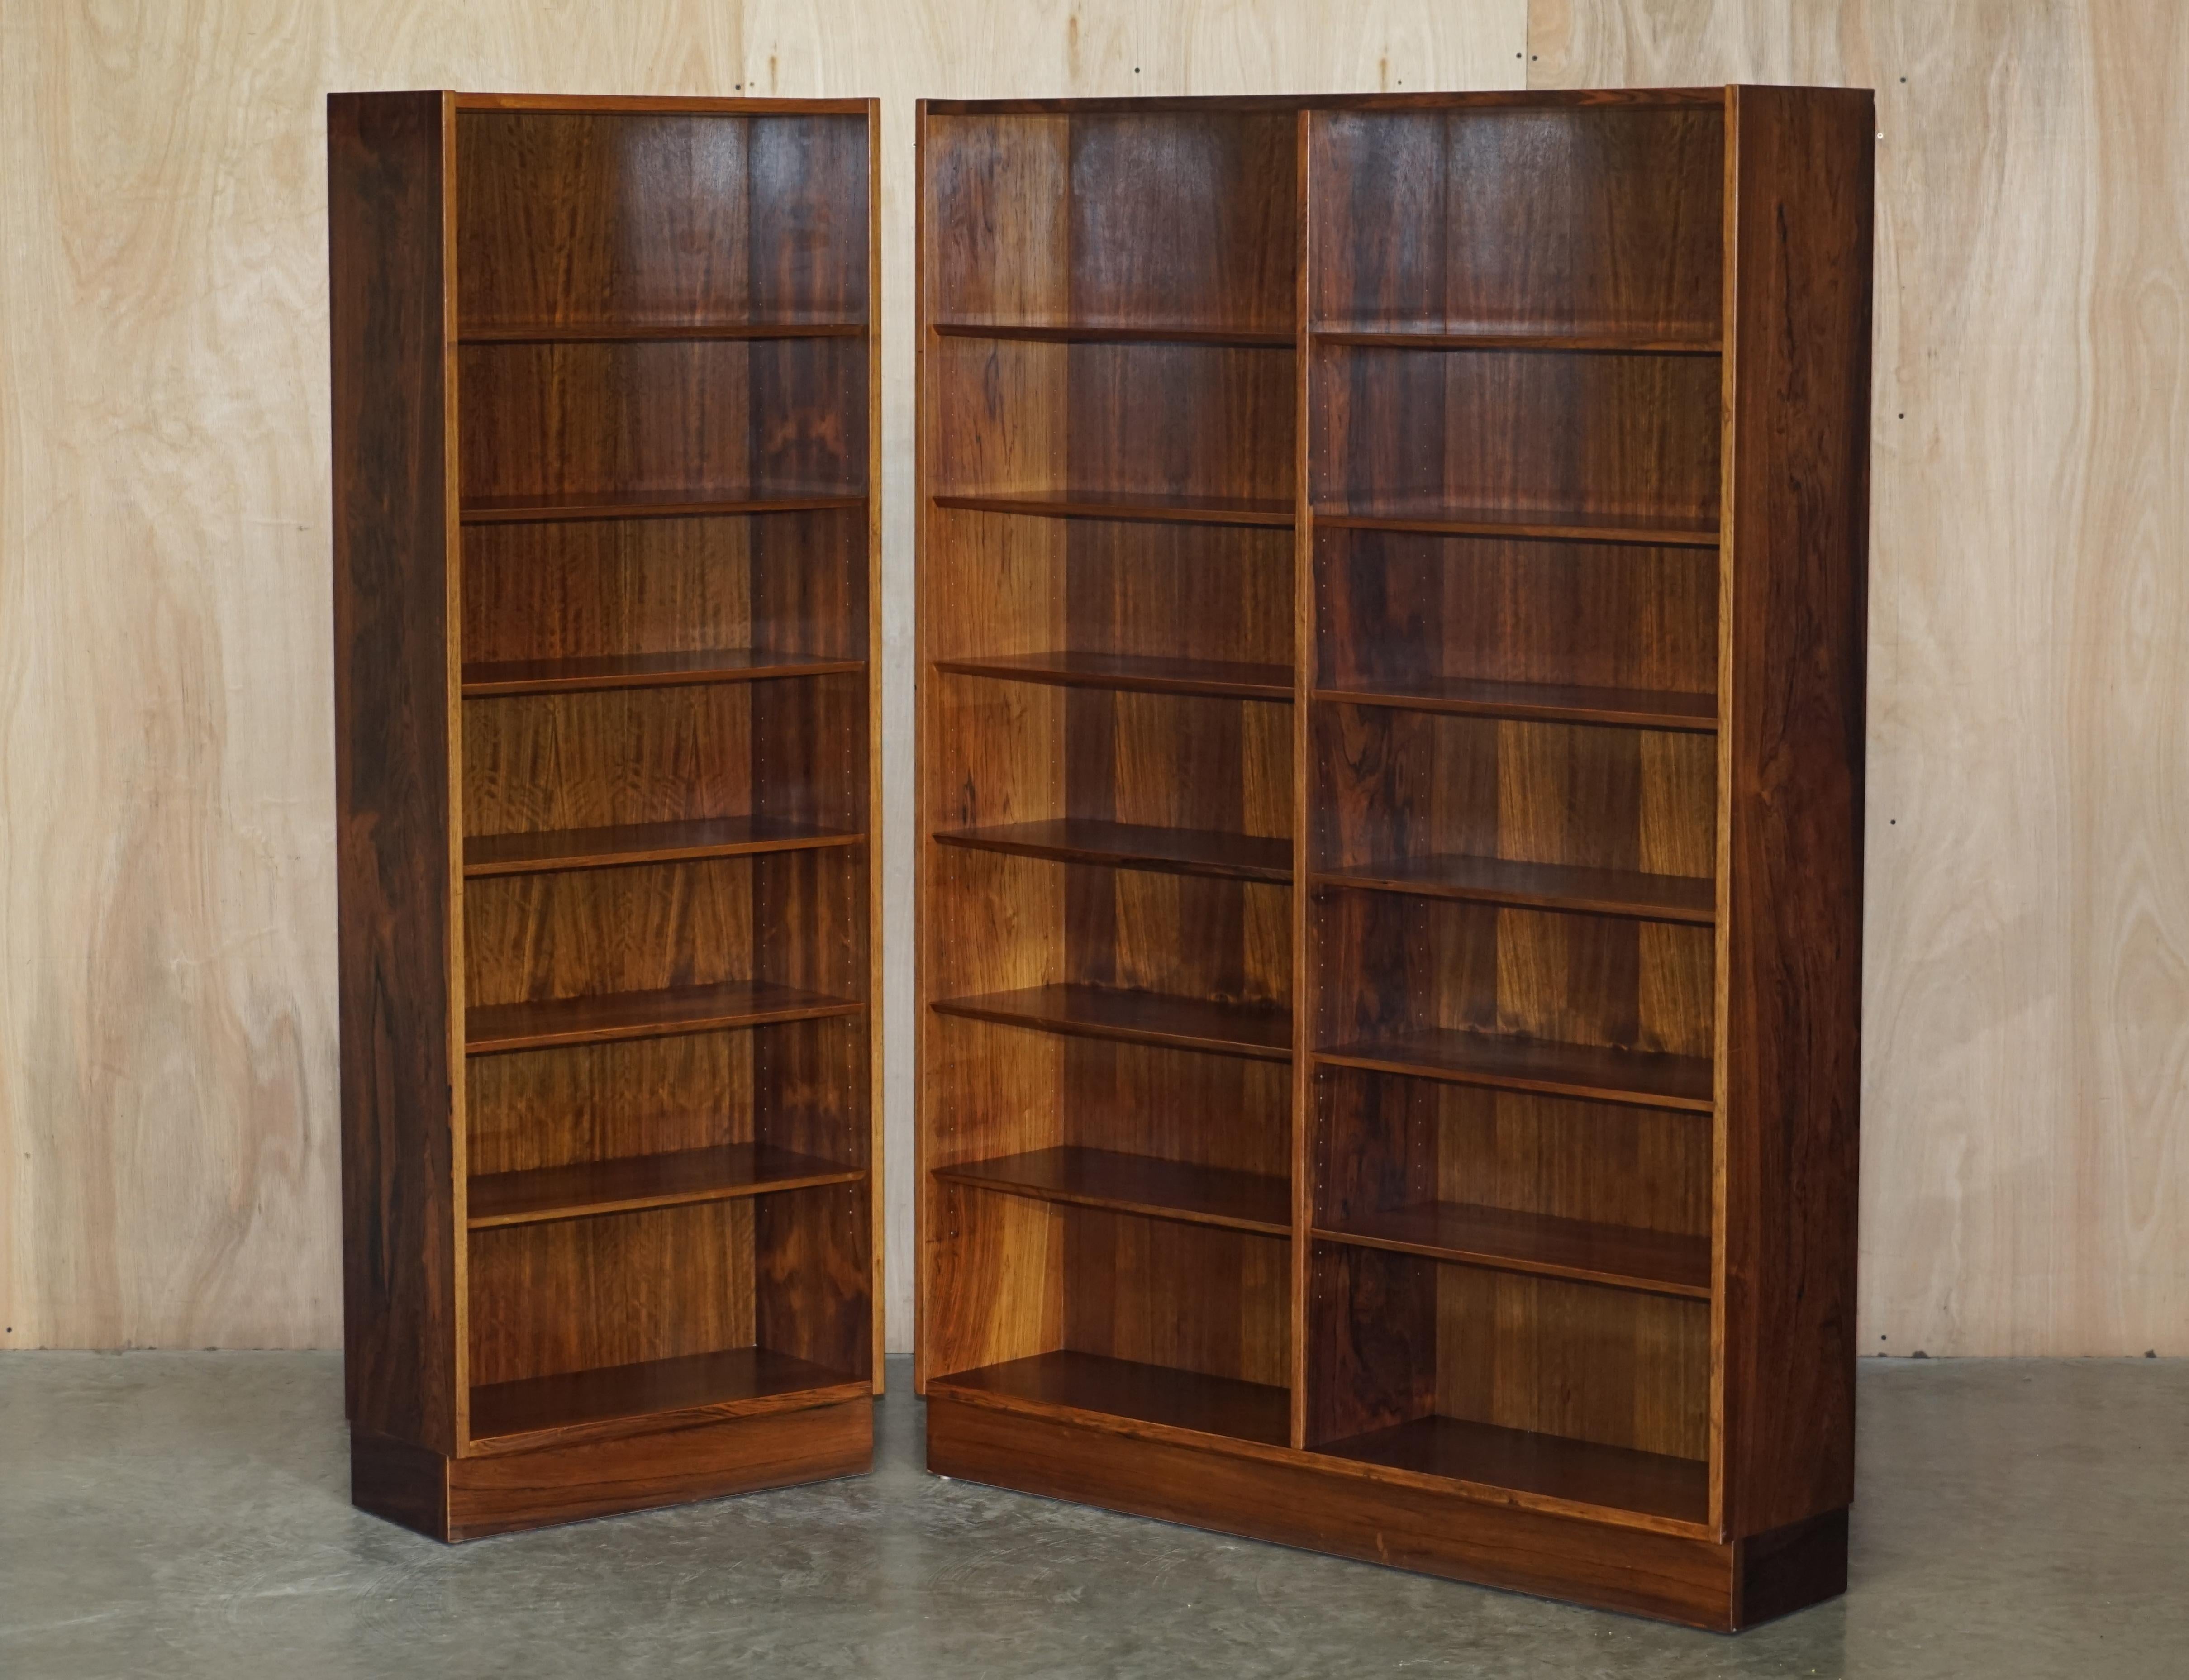 We are delighted to offer for sale this lovely vintage circa 1950s fully stamped Poul Hundevad Brazilian Rosewood, triple bank, open library bookcase with height adjustable shelves hand made in Denmark

A very good looking well made and decorative